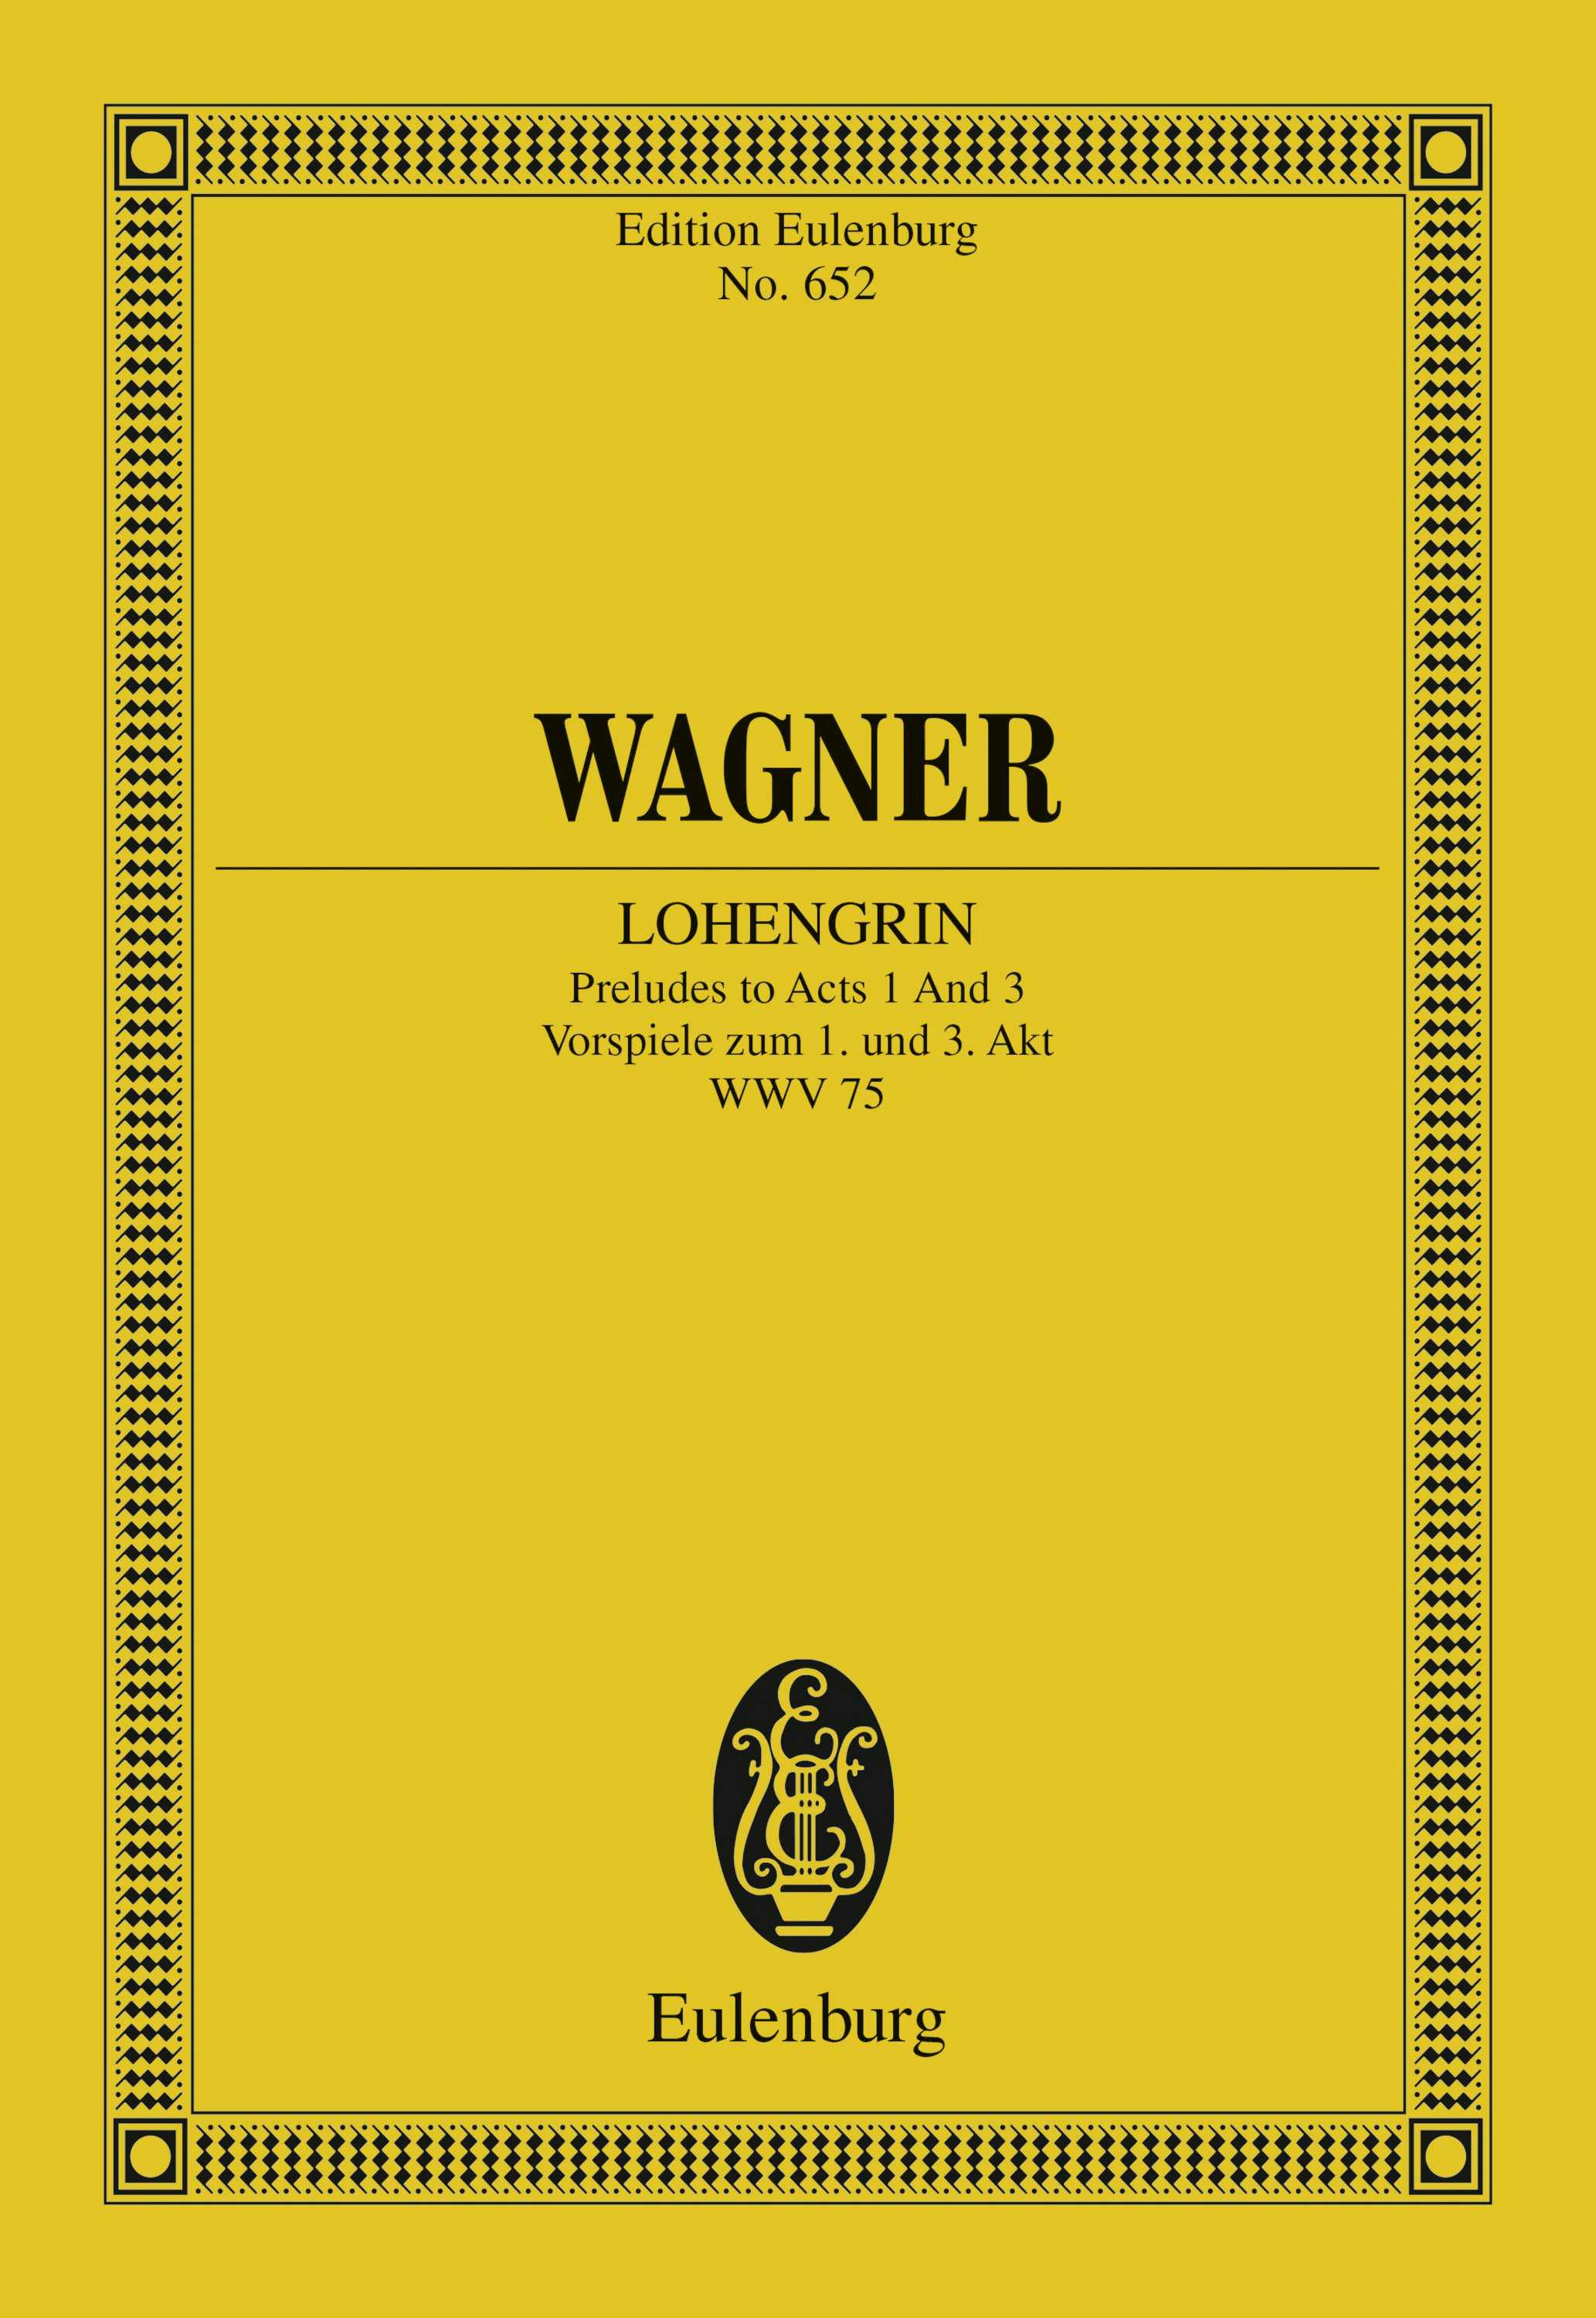 Lohengrin: Preludes to Acts 1 and 3 - undefined